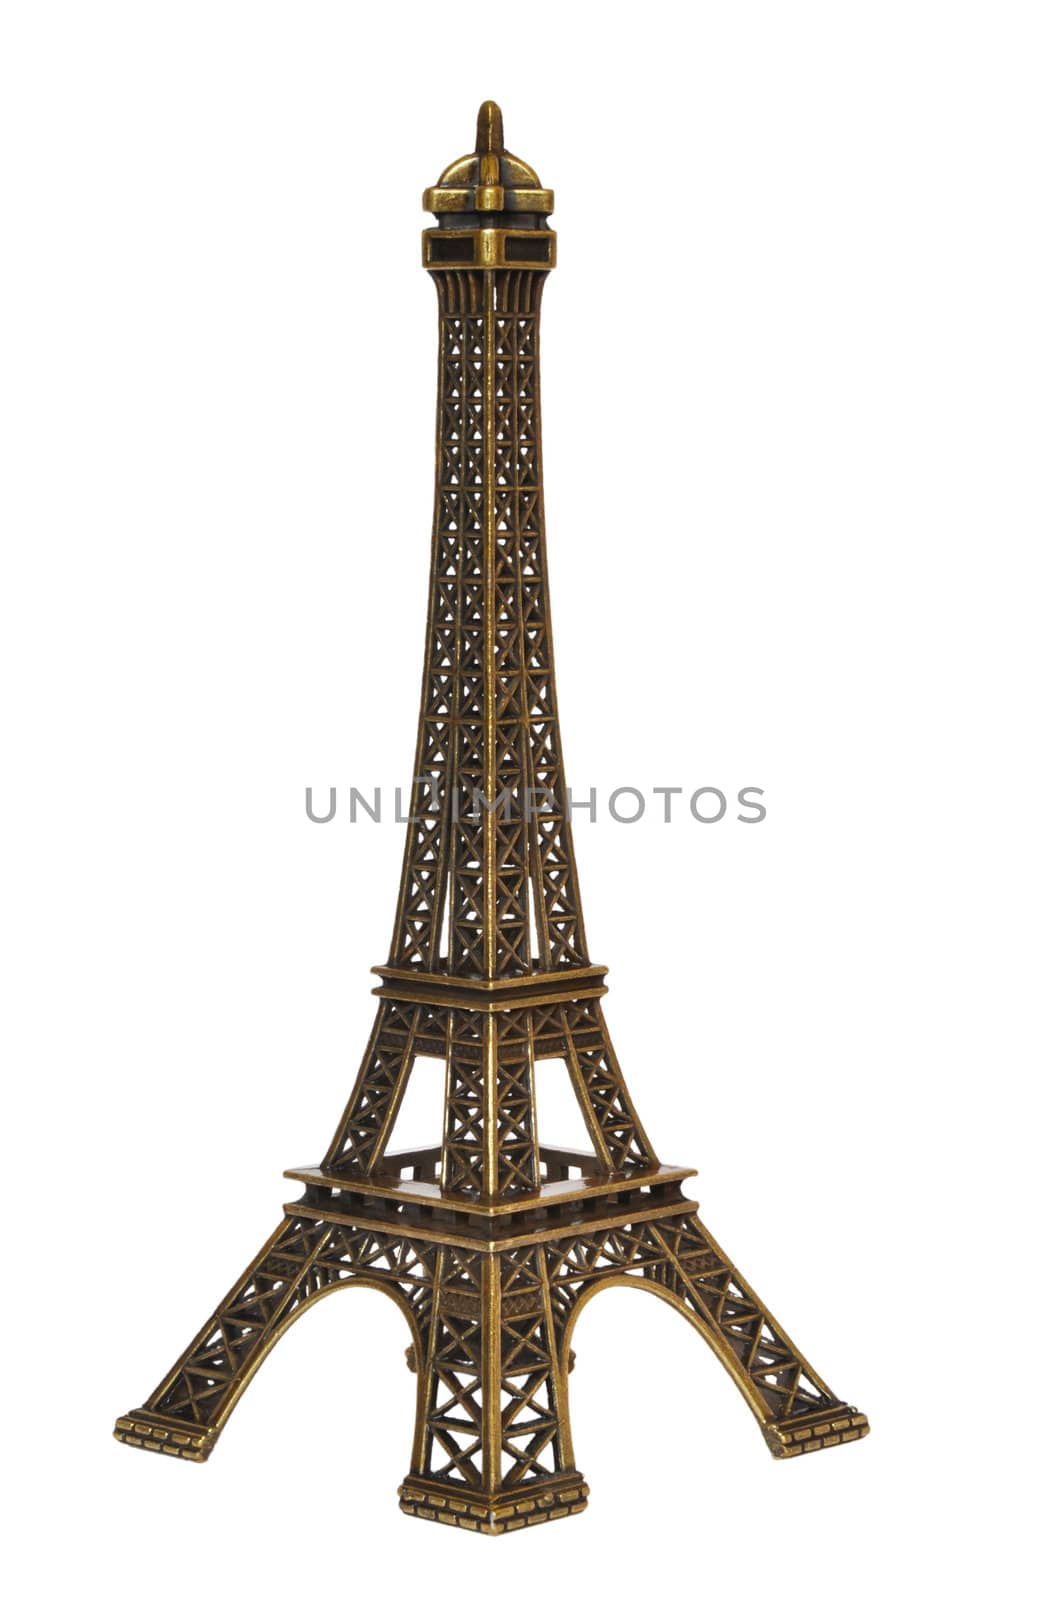 Eiffel Tower replica isolated on a white background